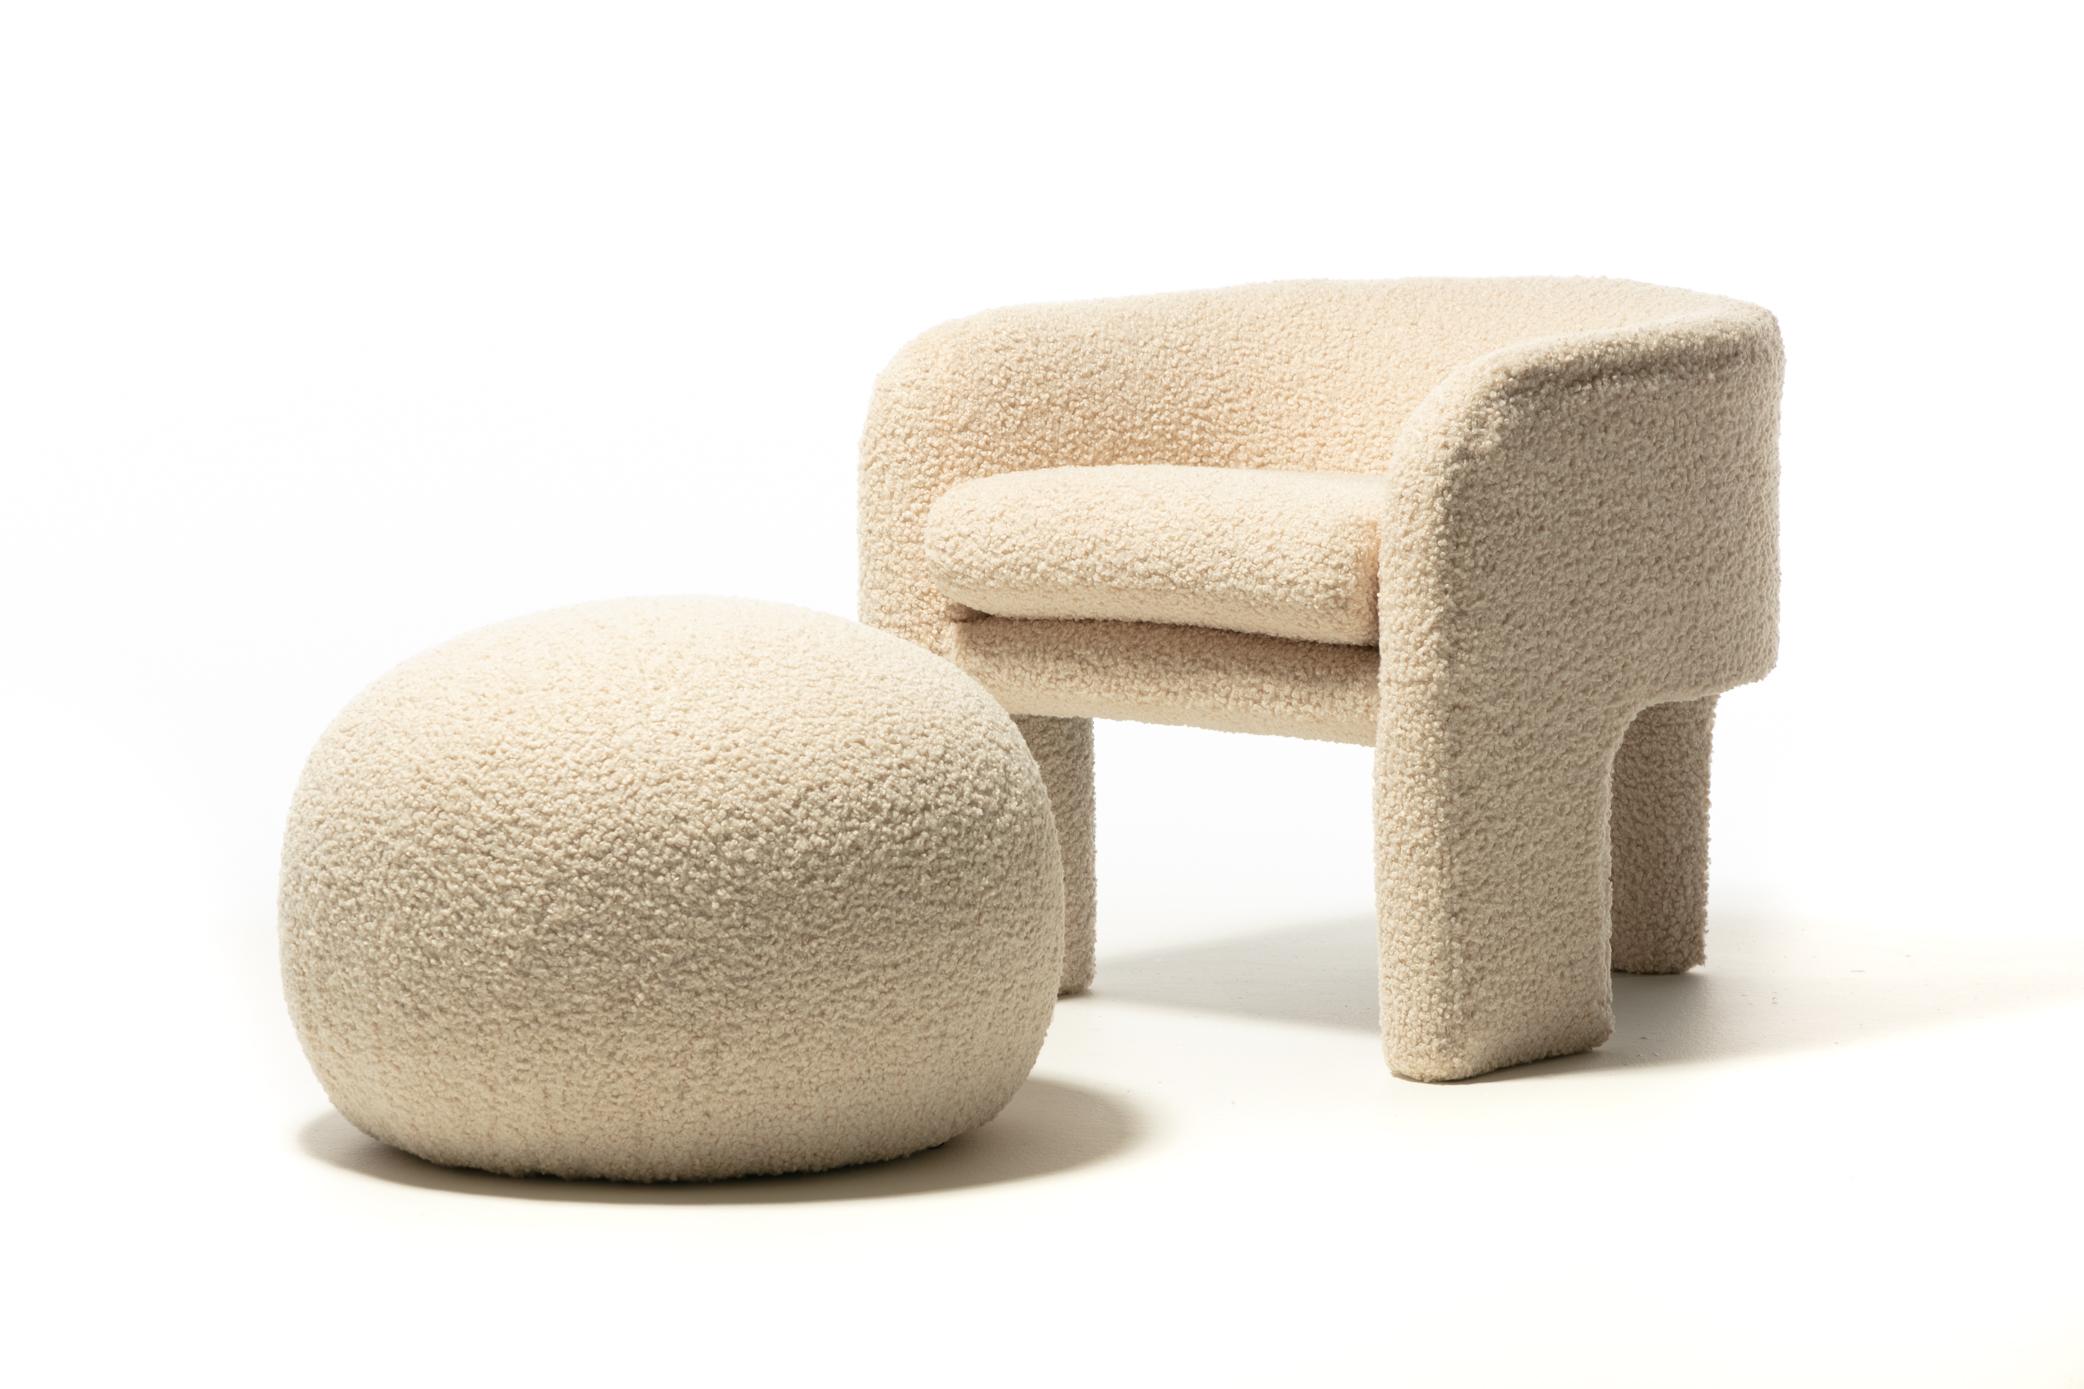 Timelessly sexy and oh so versatile pouf ottoman by Directional professionally reupholstered in soft ivory white boucle with a high durability rating (over 50k double rubs). Plush and comfortable, the poufs can be easily incorporated as ottomans